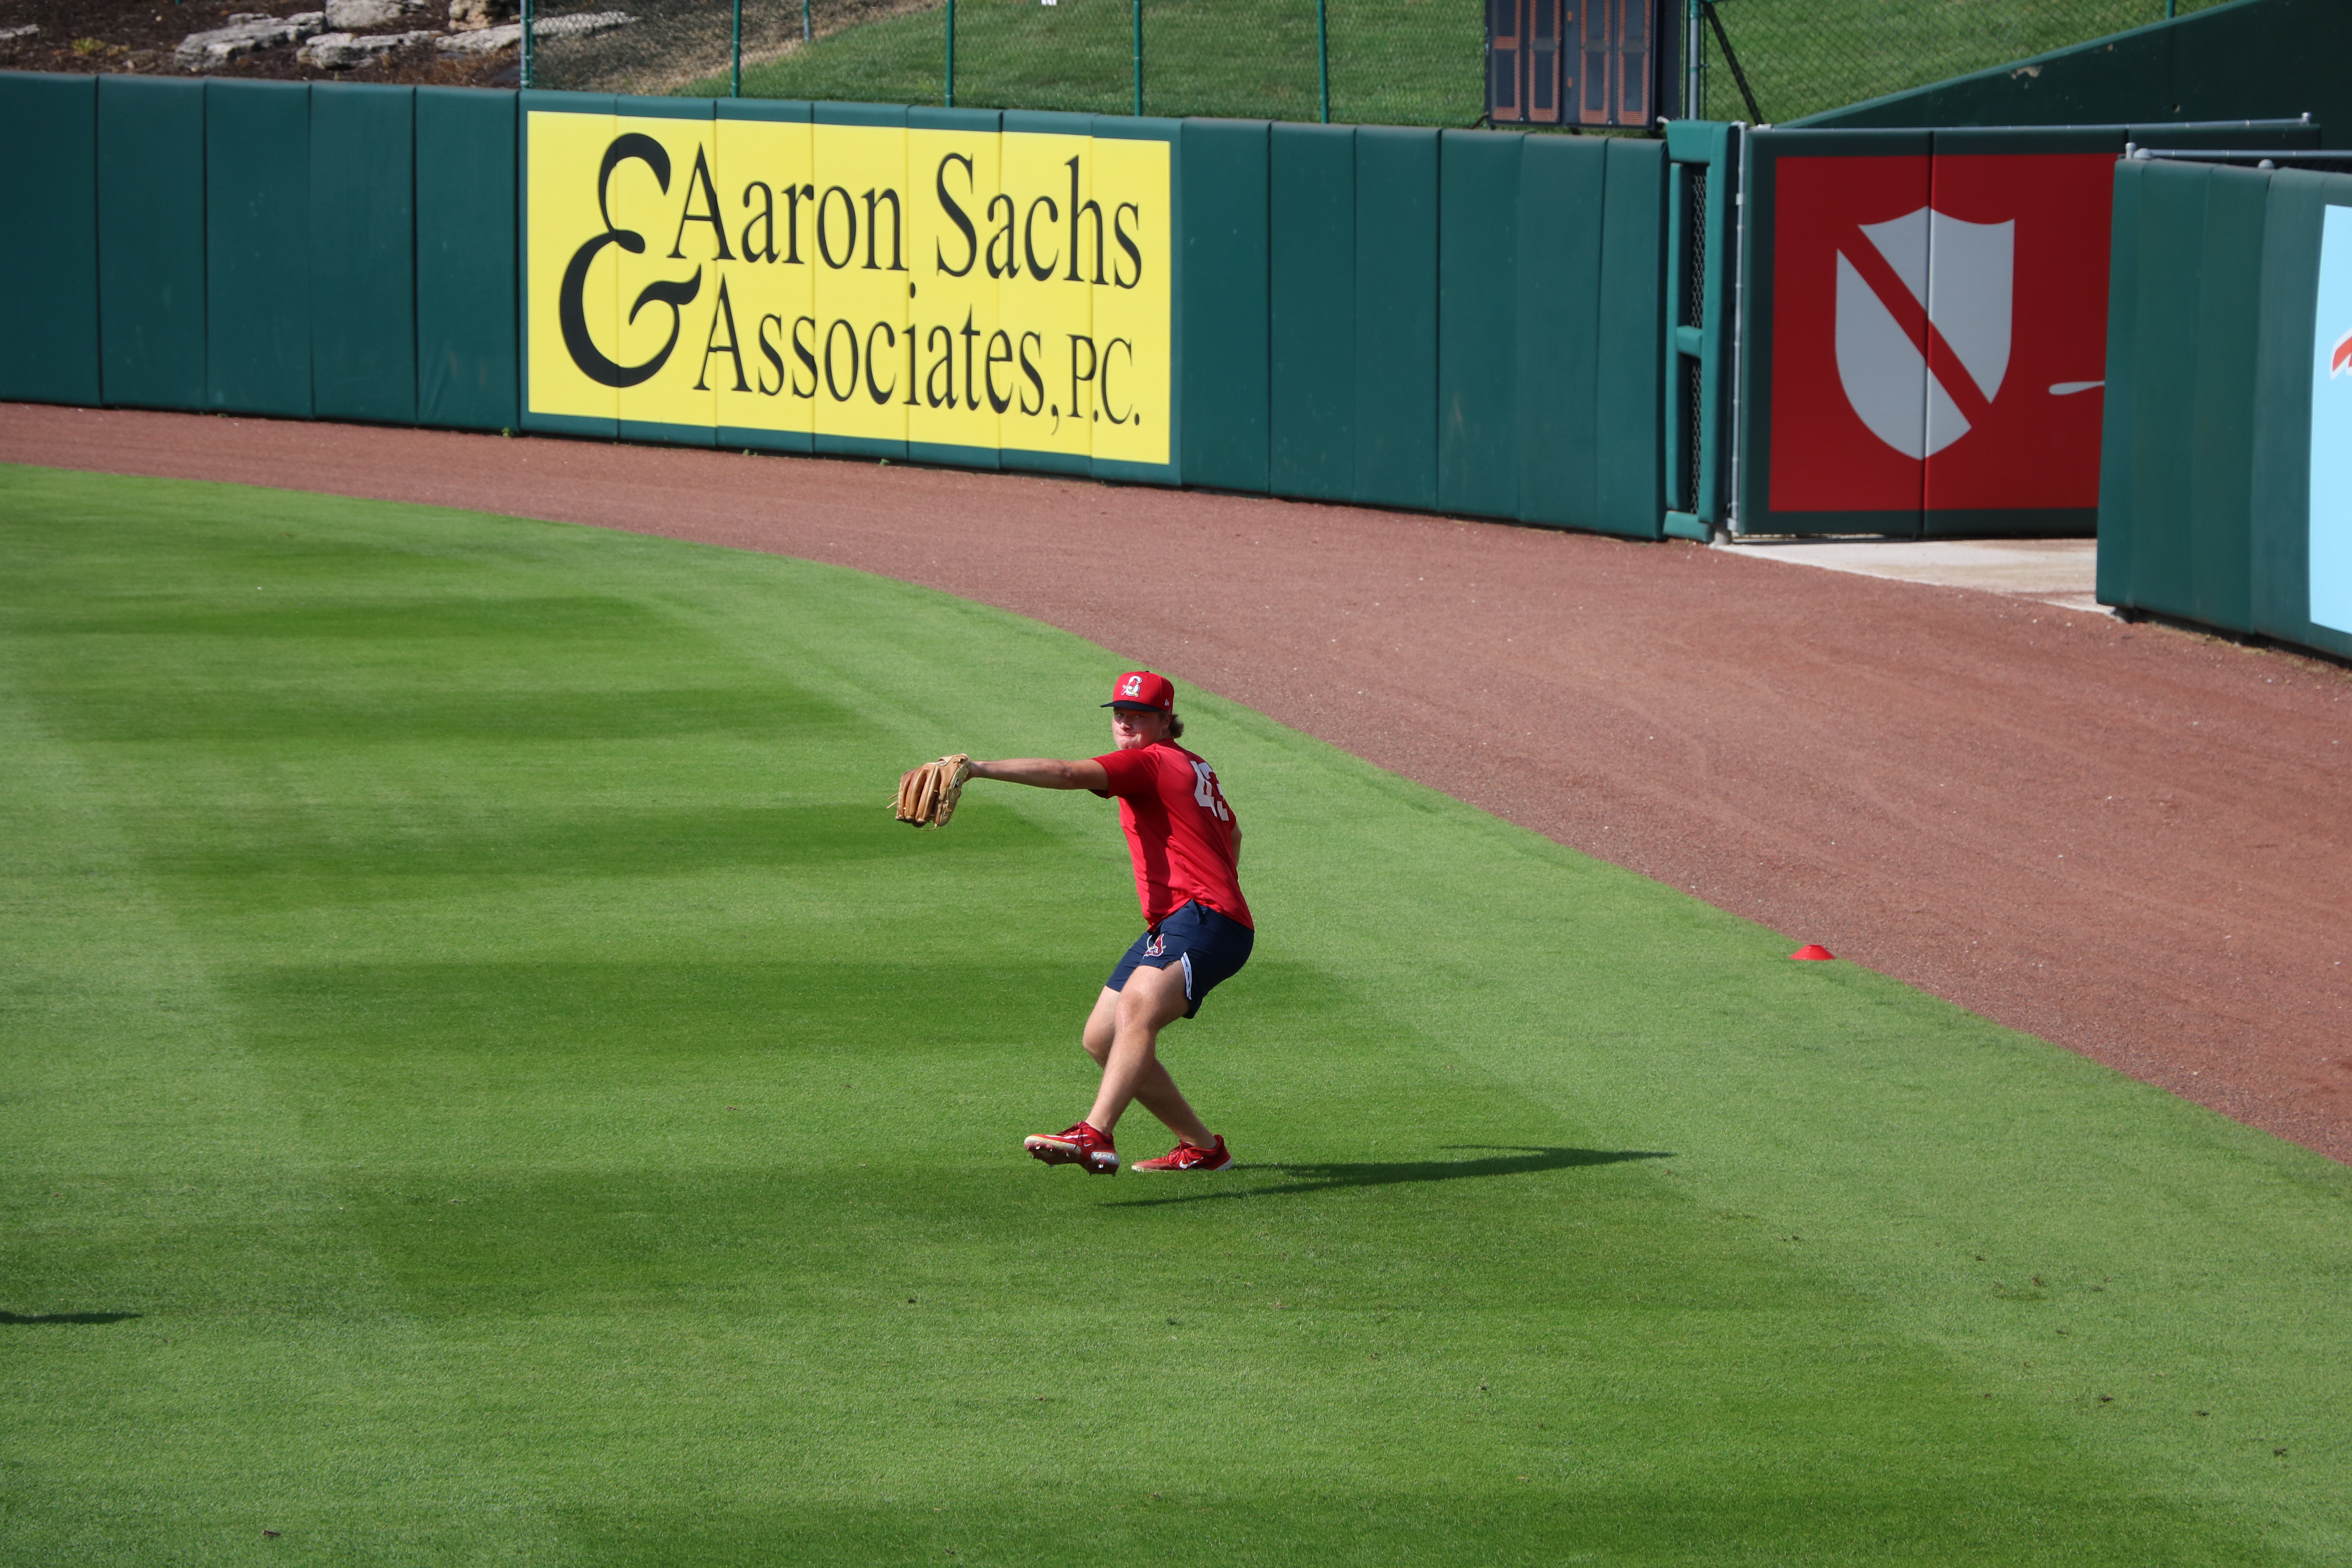 Tekoah Roby practices throwing the ball in the outfield at Hammons Field